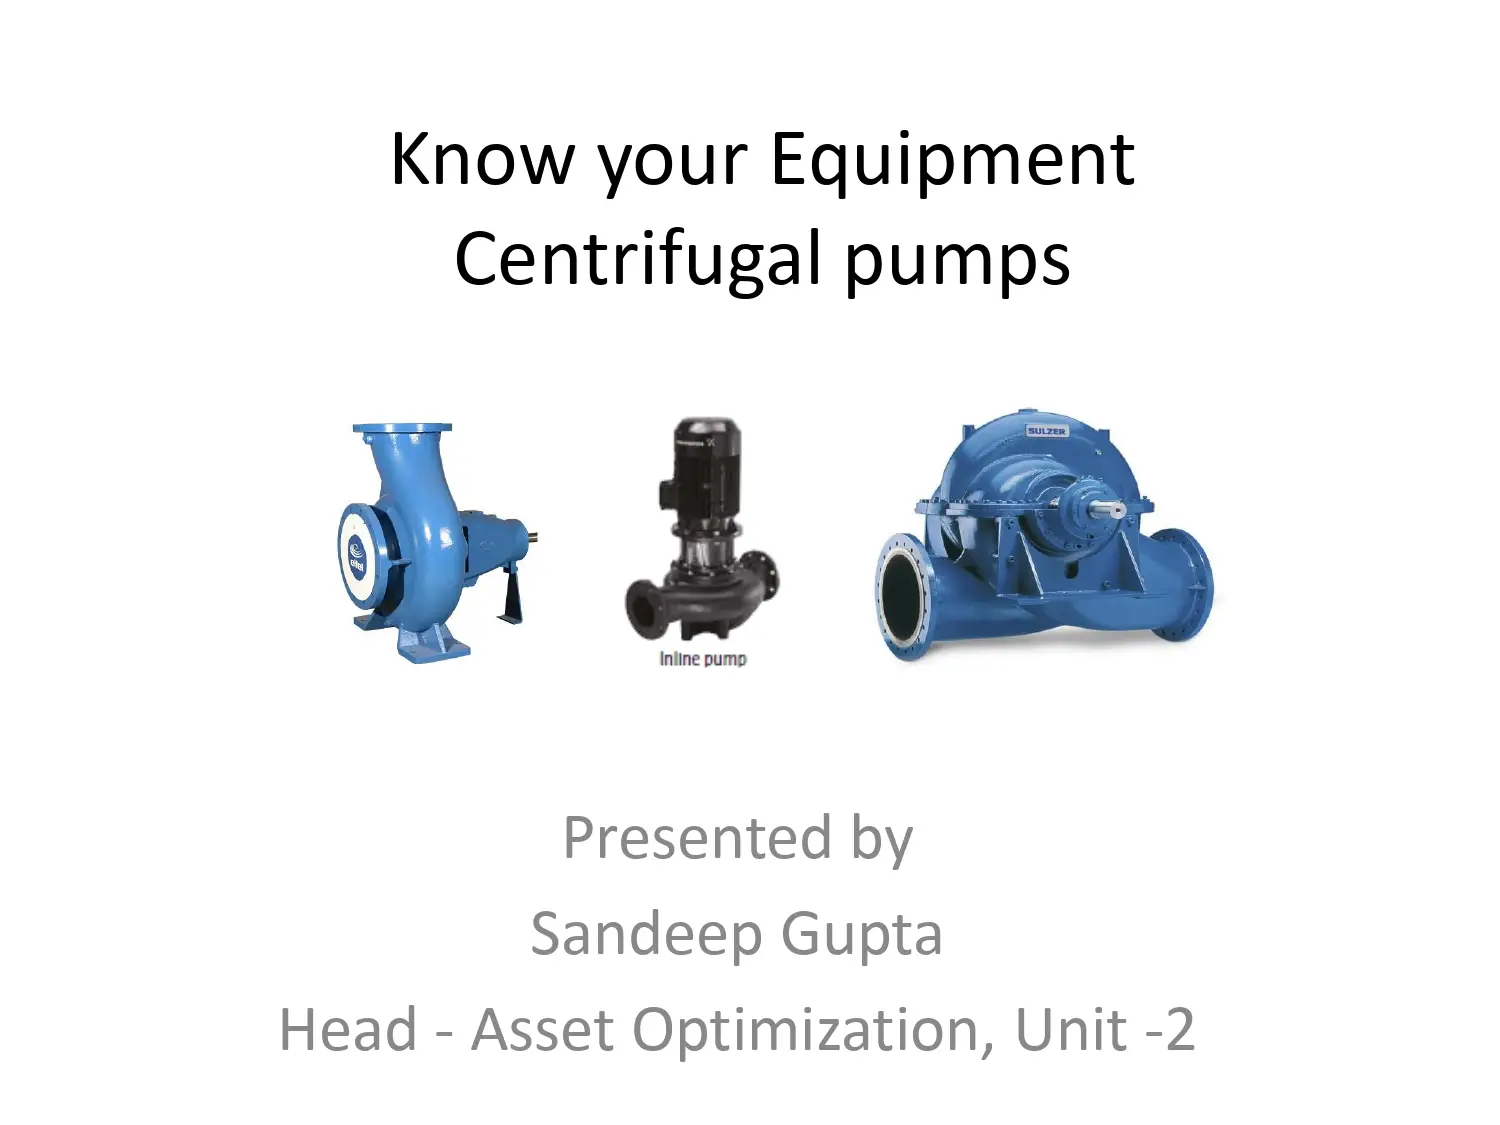 Know your Equipment Centrifugal pumps